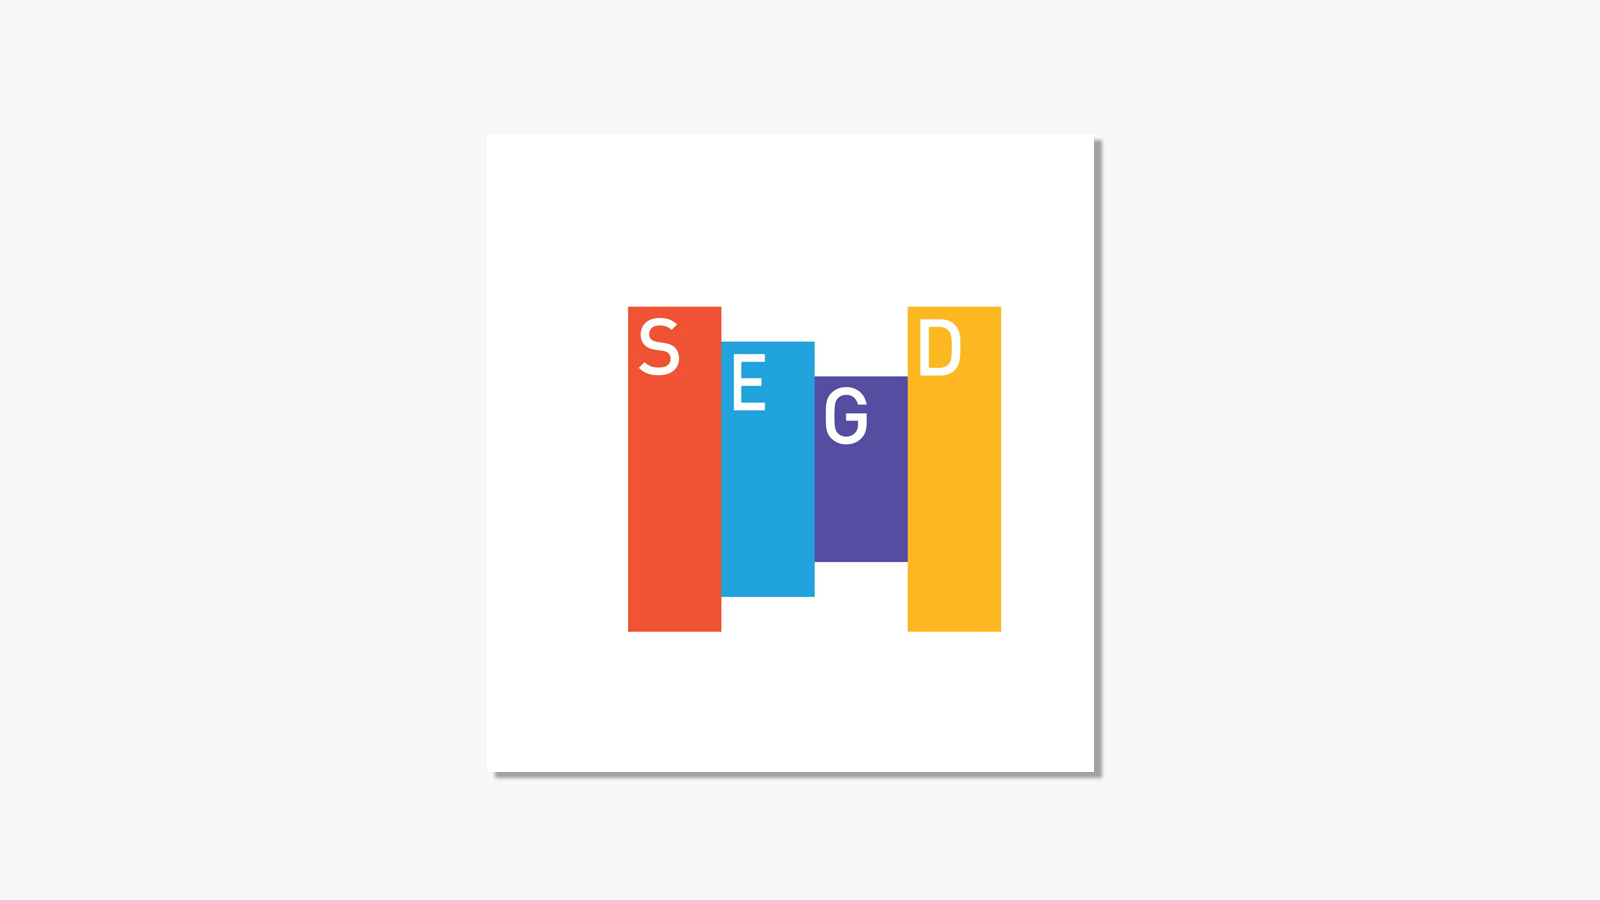 SEGD - Society for Experiential Graphic Design